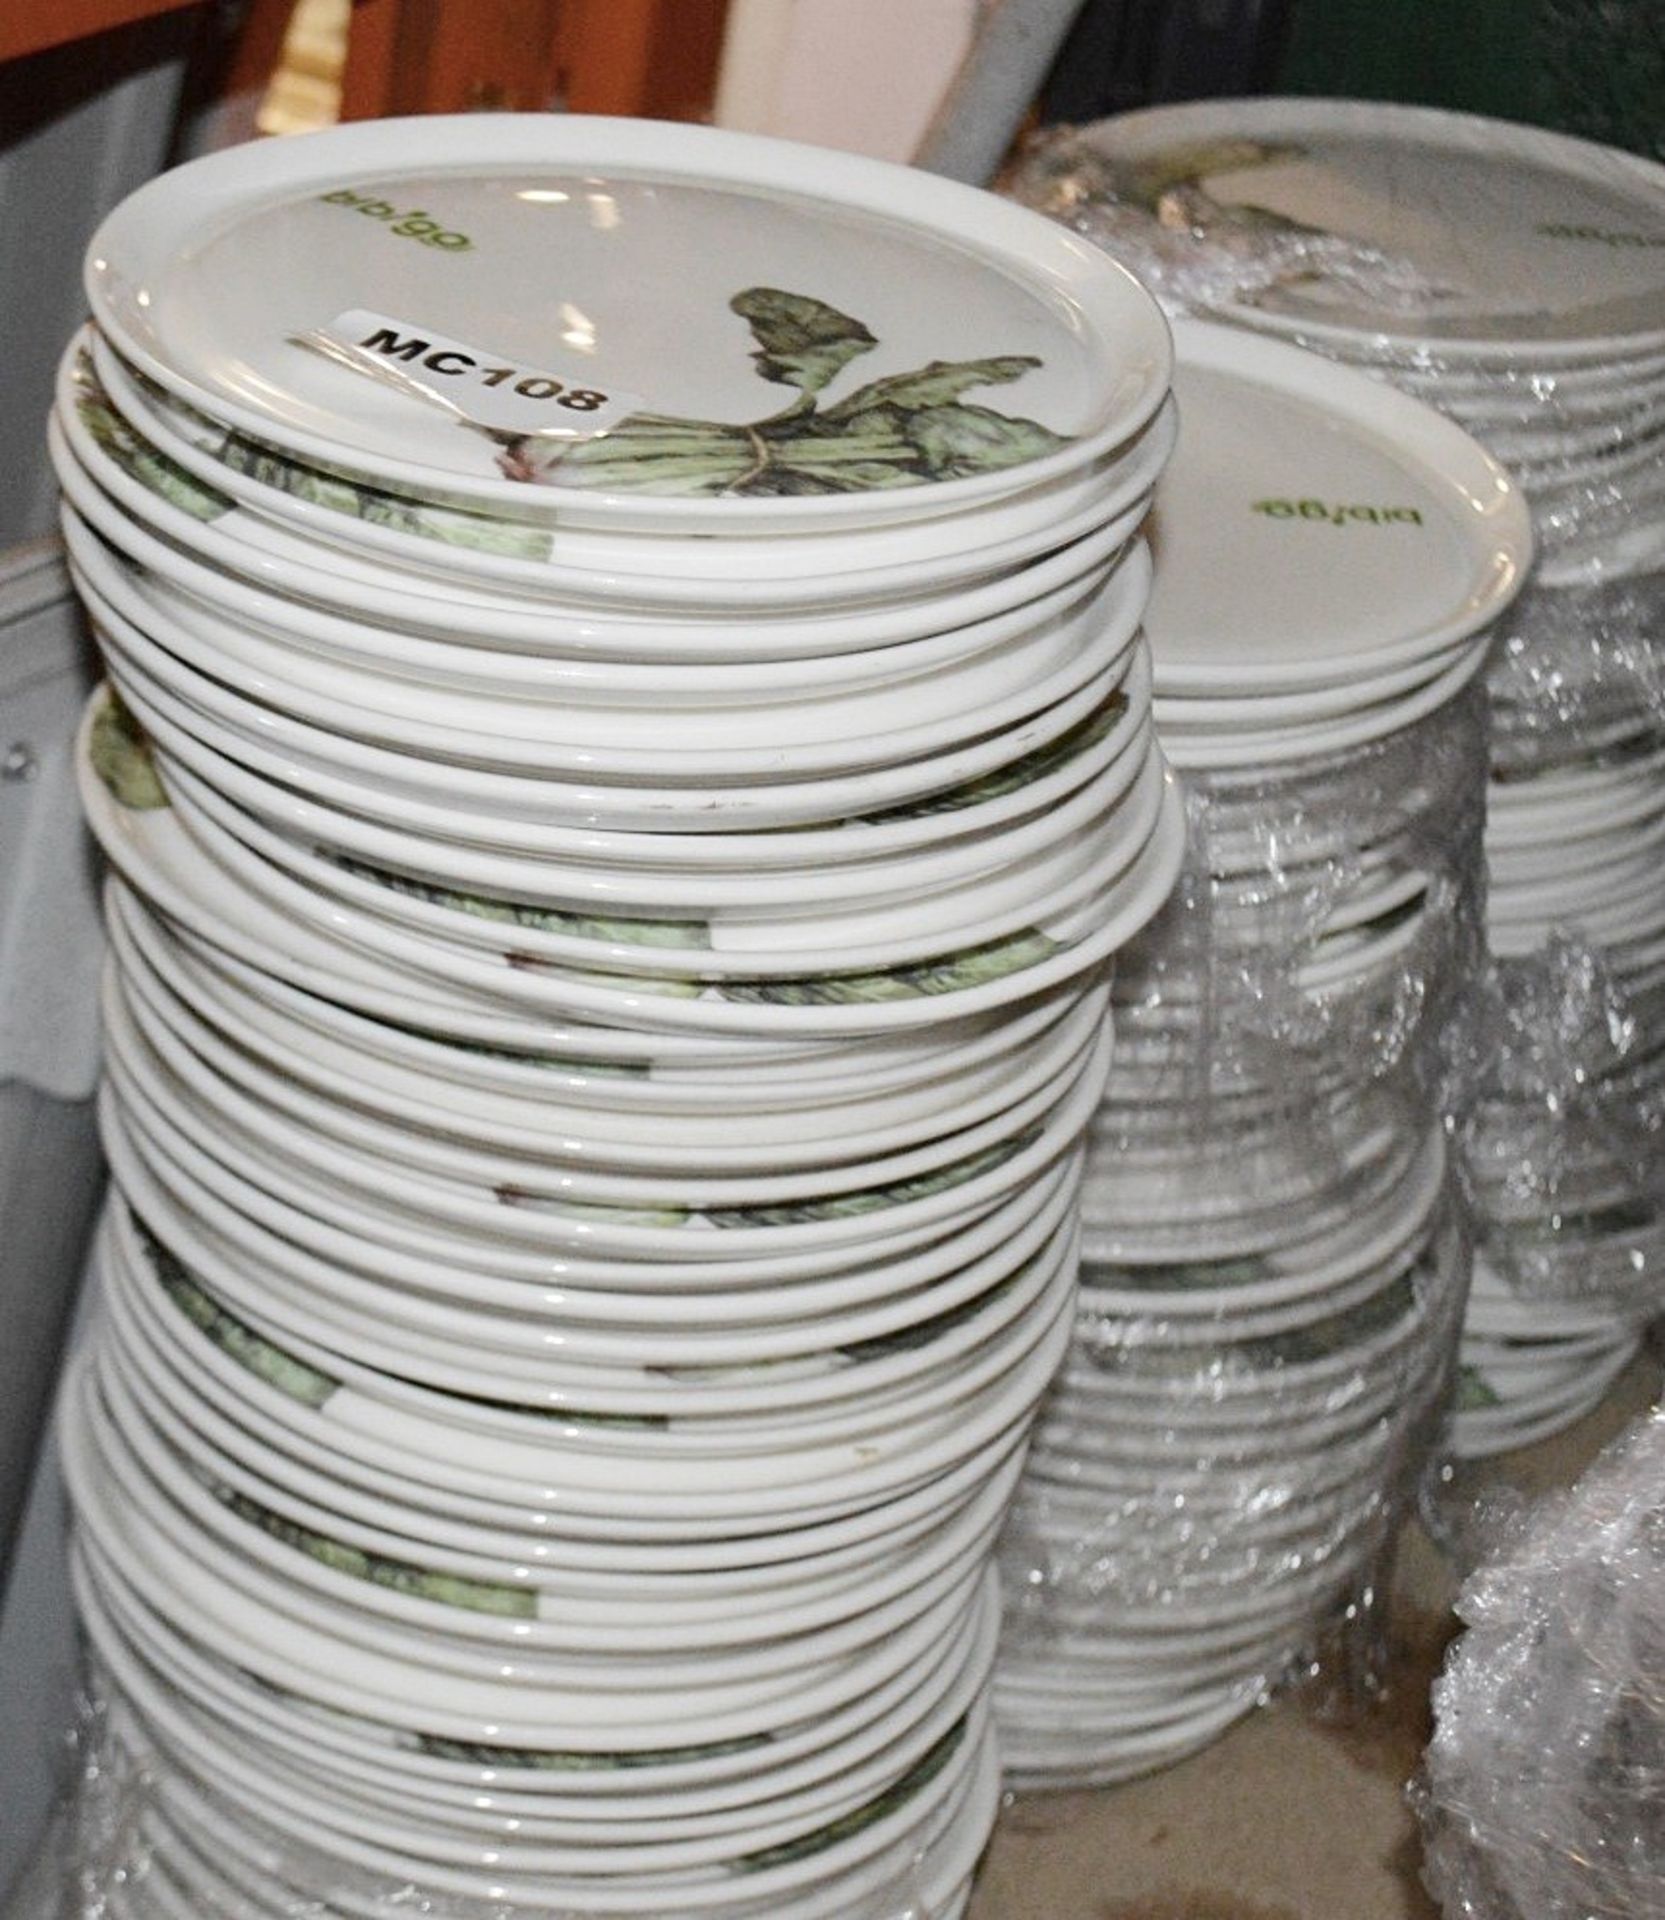 50 x BIBIGO Branded Fine Dining Plates - 16.5cm - Pre-owned, From A London Restaurant - Ref: WH1 - Image 2 of 5